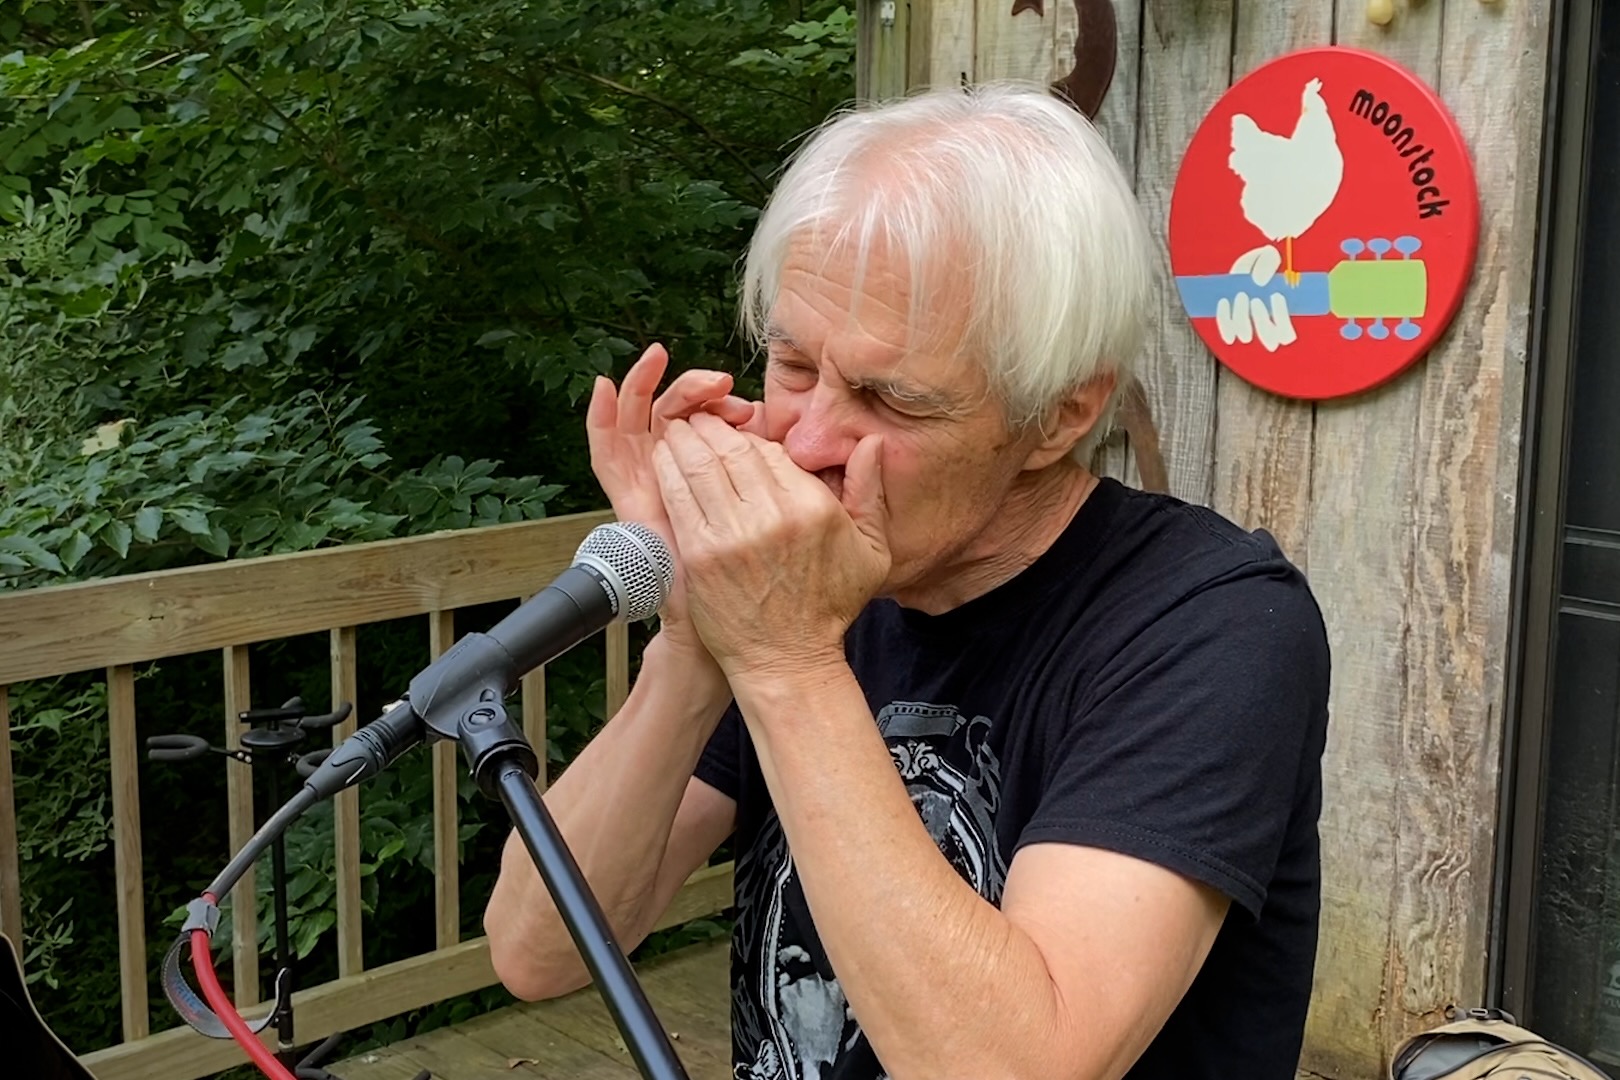 Musician Richard Sleigh performing with a harmonica on a backyard stage.